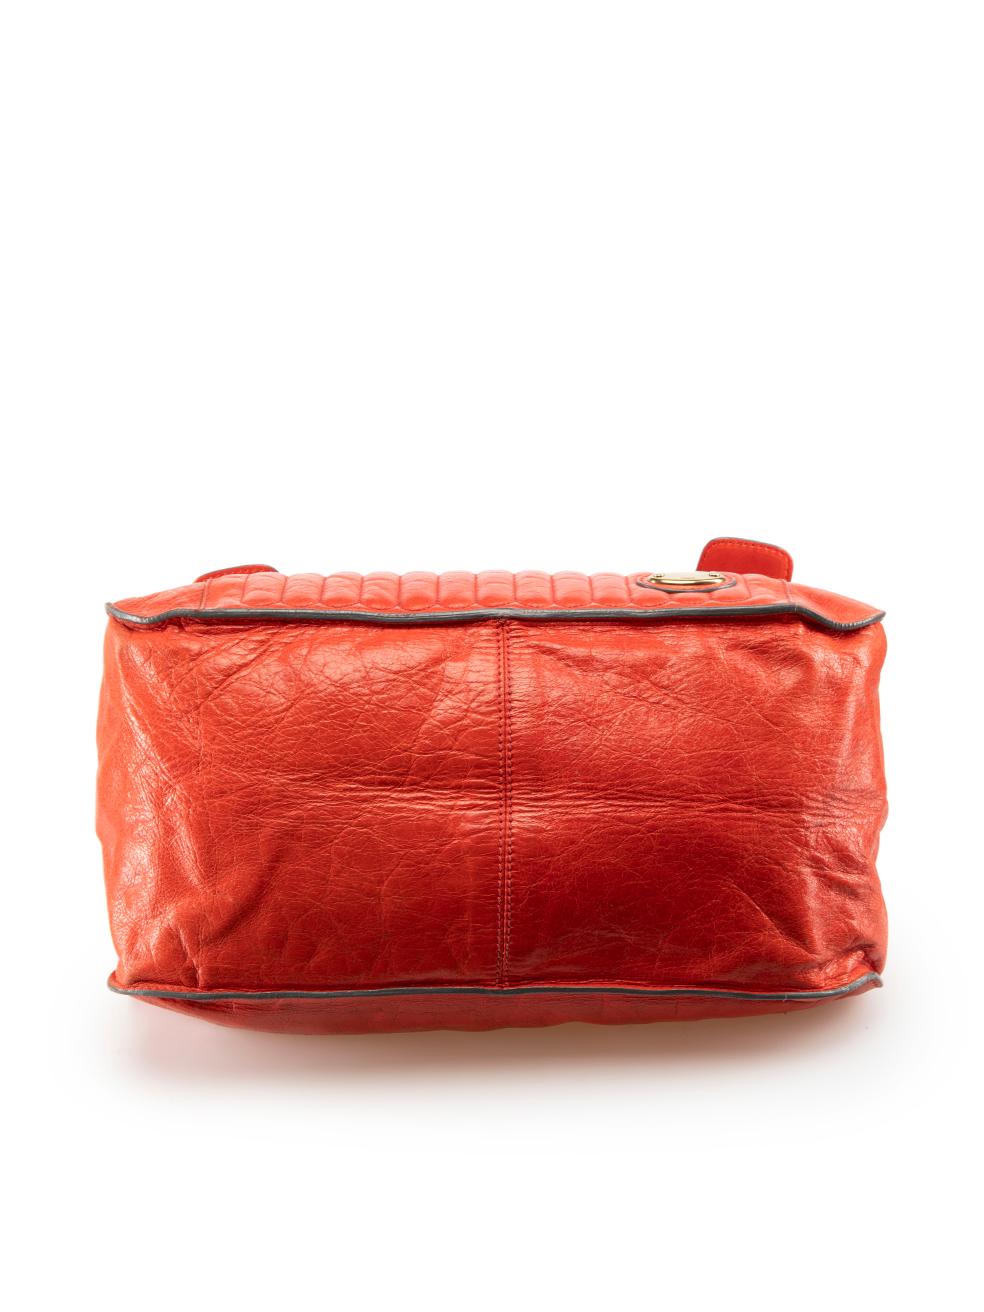 Women's Chloé Red Leather Bay Quilted Bag For Sale